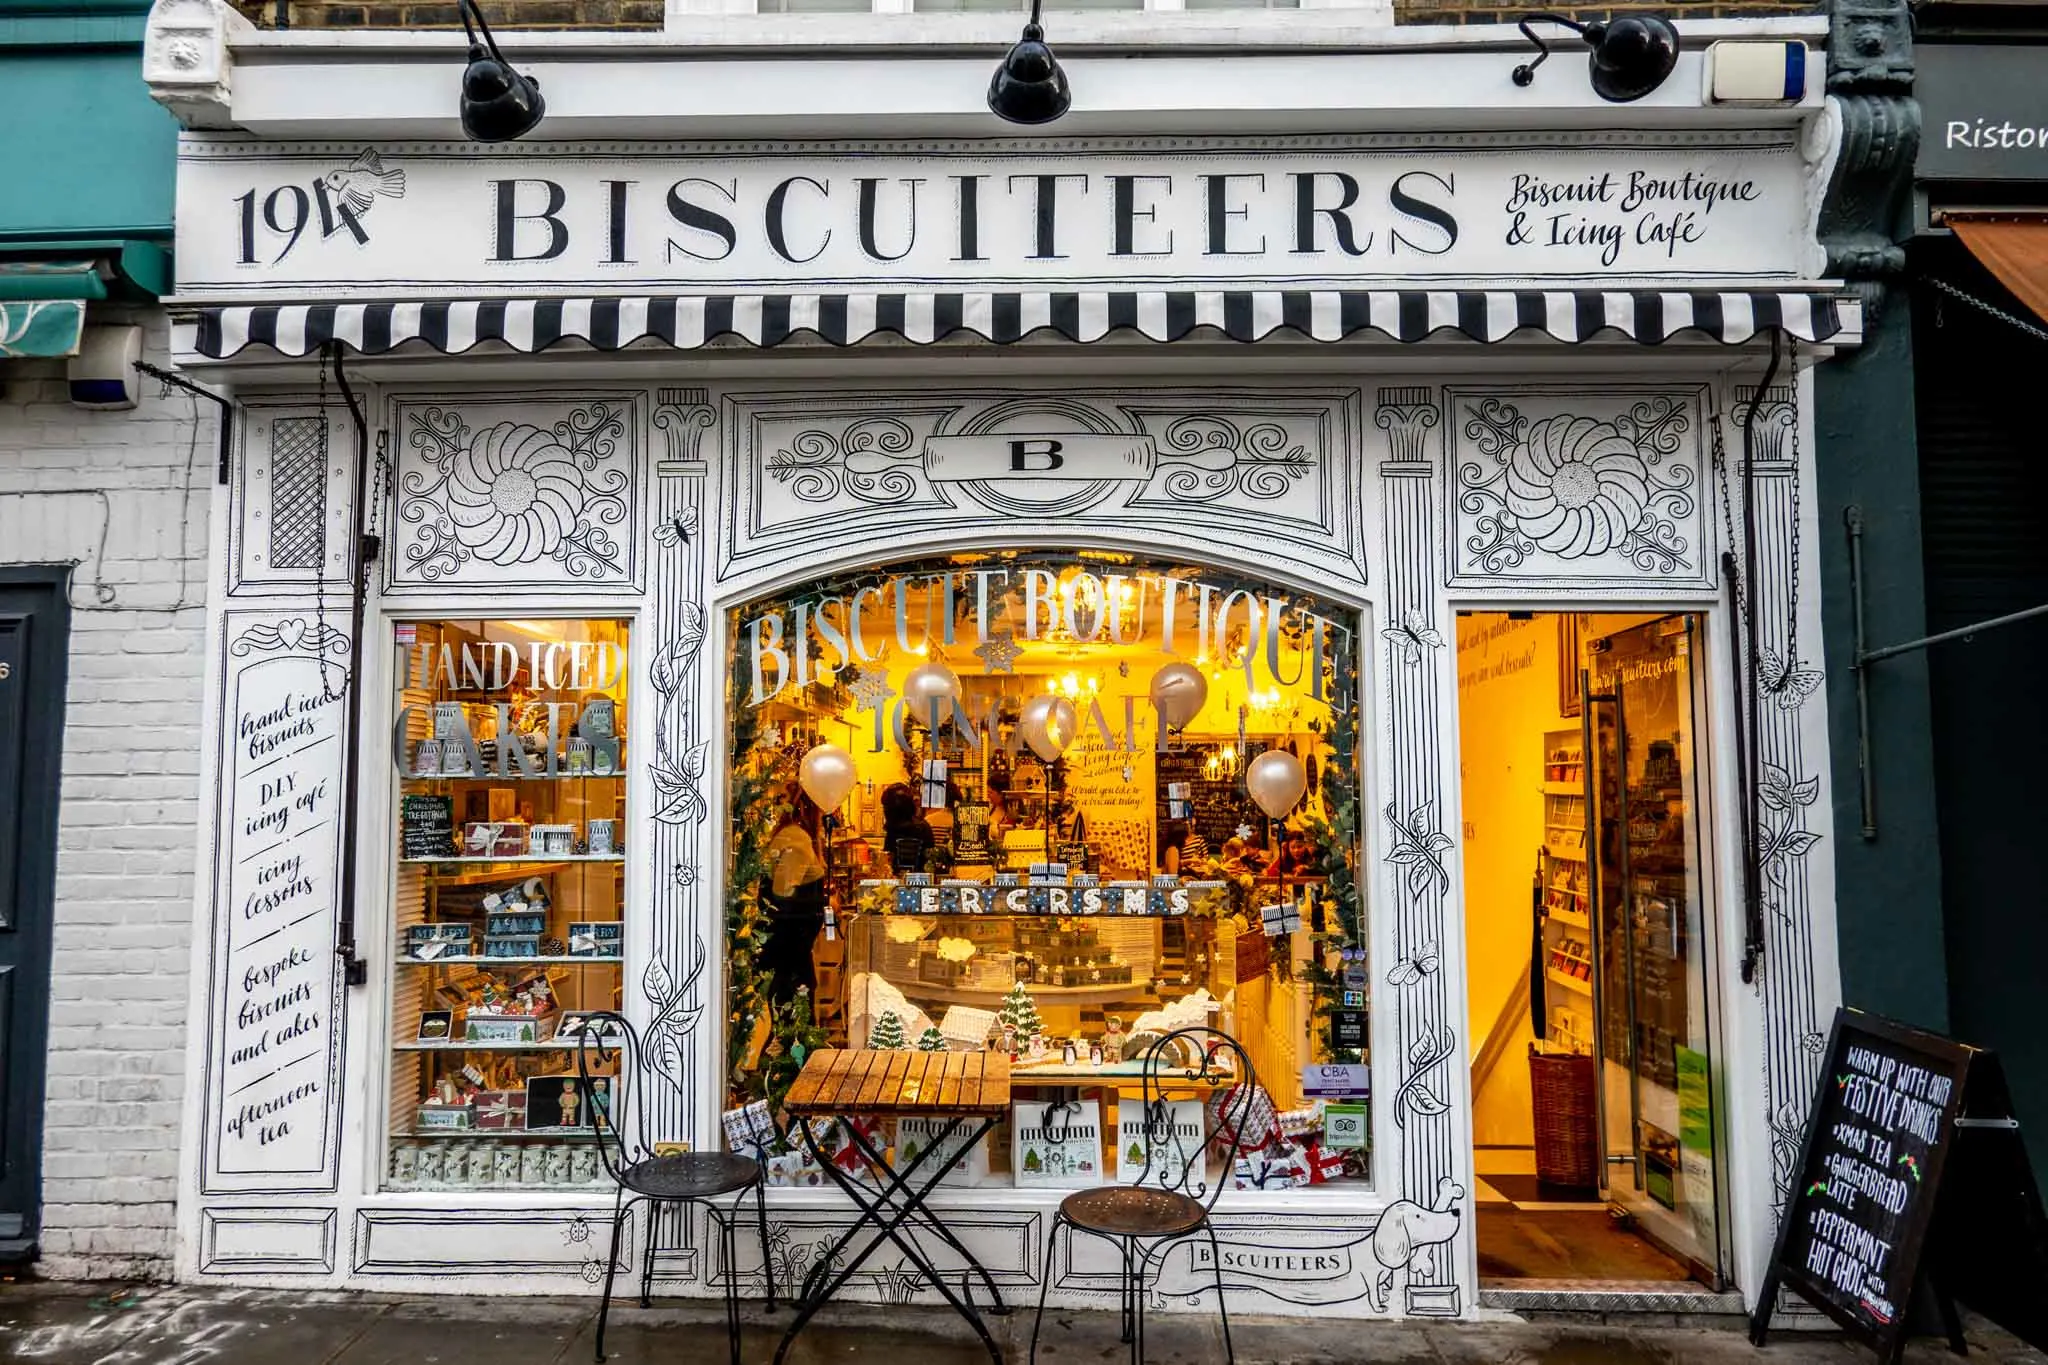 Black and white exterior of Biscuiteers cafe